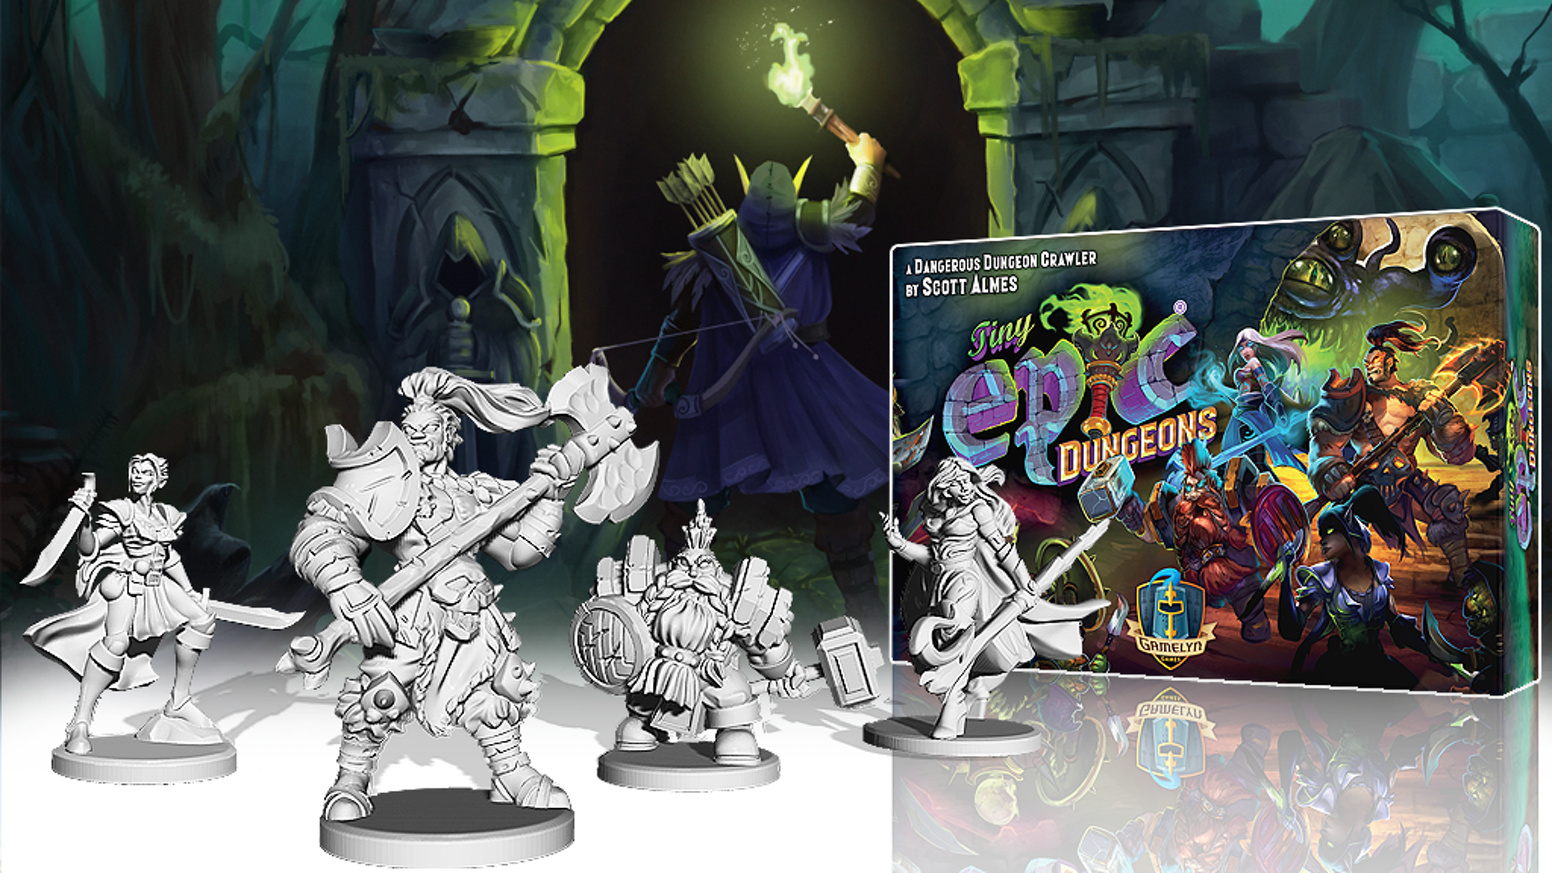 Tiny Epic Dungeons, still available through late pledges.